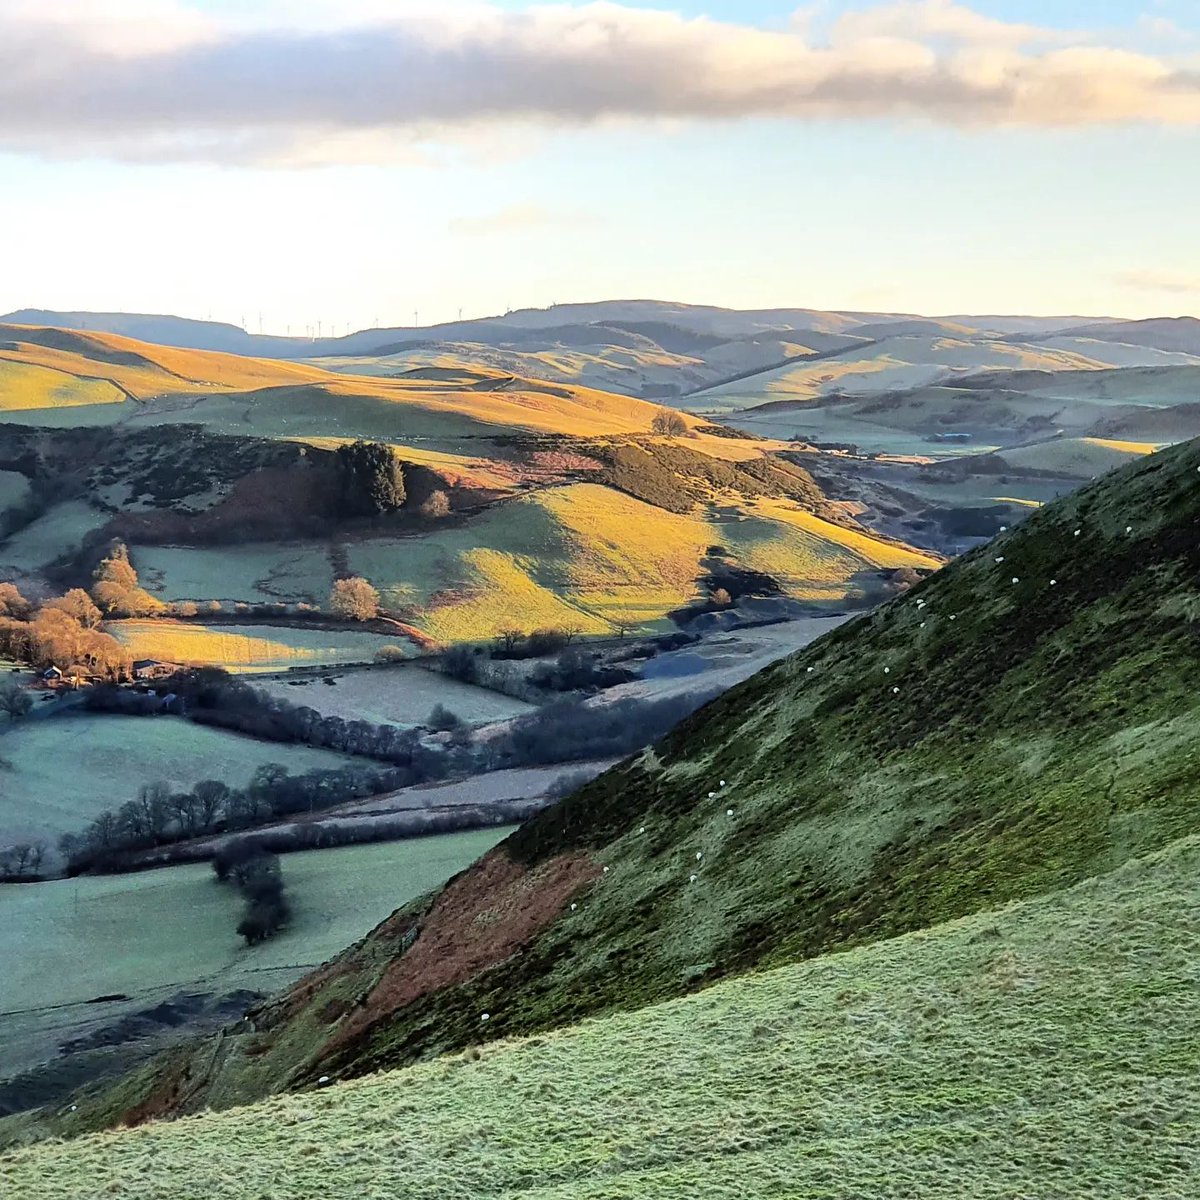 Morning light on a winters day in Mid Wales. Just stunning. #RealMidWales #VisitMidWales #Winter #frost #getoutdoors #DiscoverYourWales #CambrianMountains #VisitWales #Ceredigion visitmidwales.co.uk/destination/th… 📷 @theprospector73 @cambrian_safaris